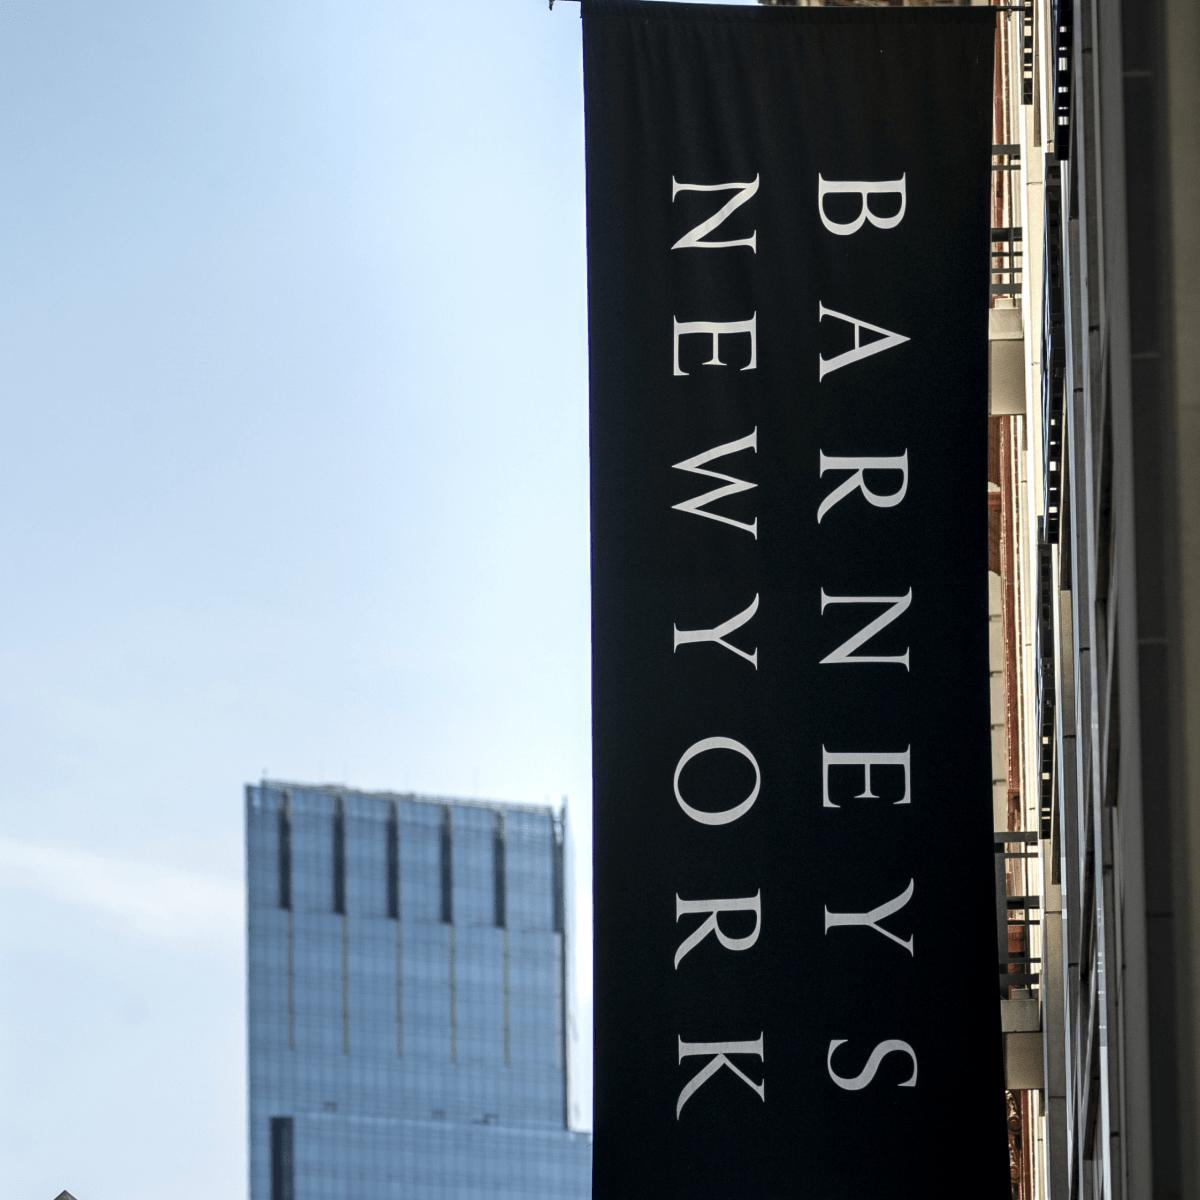 Barneys Brand Strategy and the Luxury Market